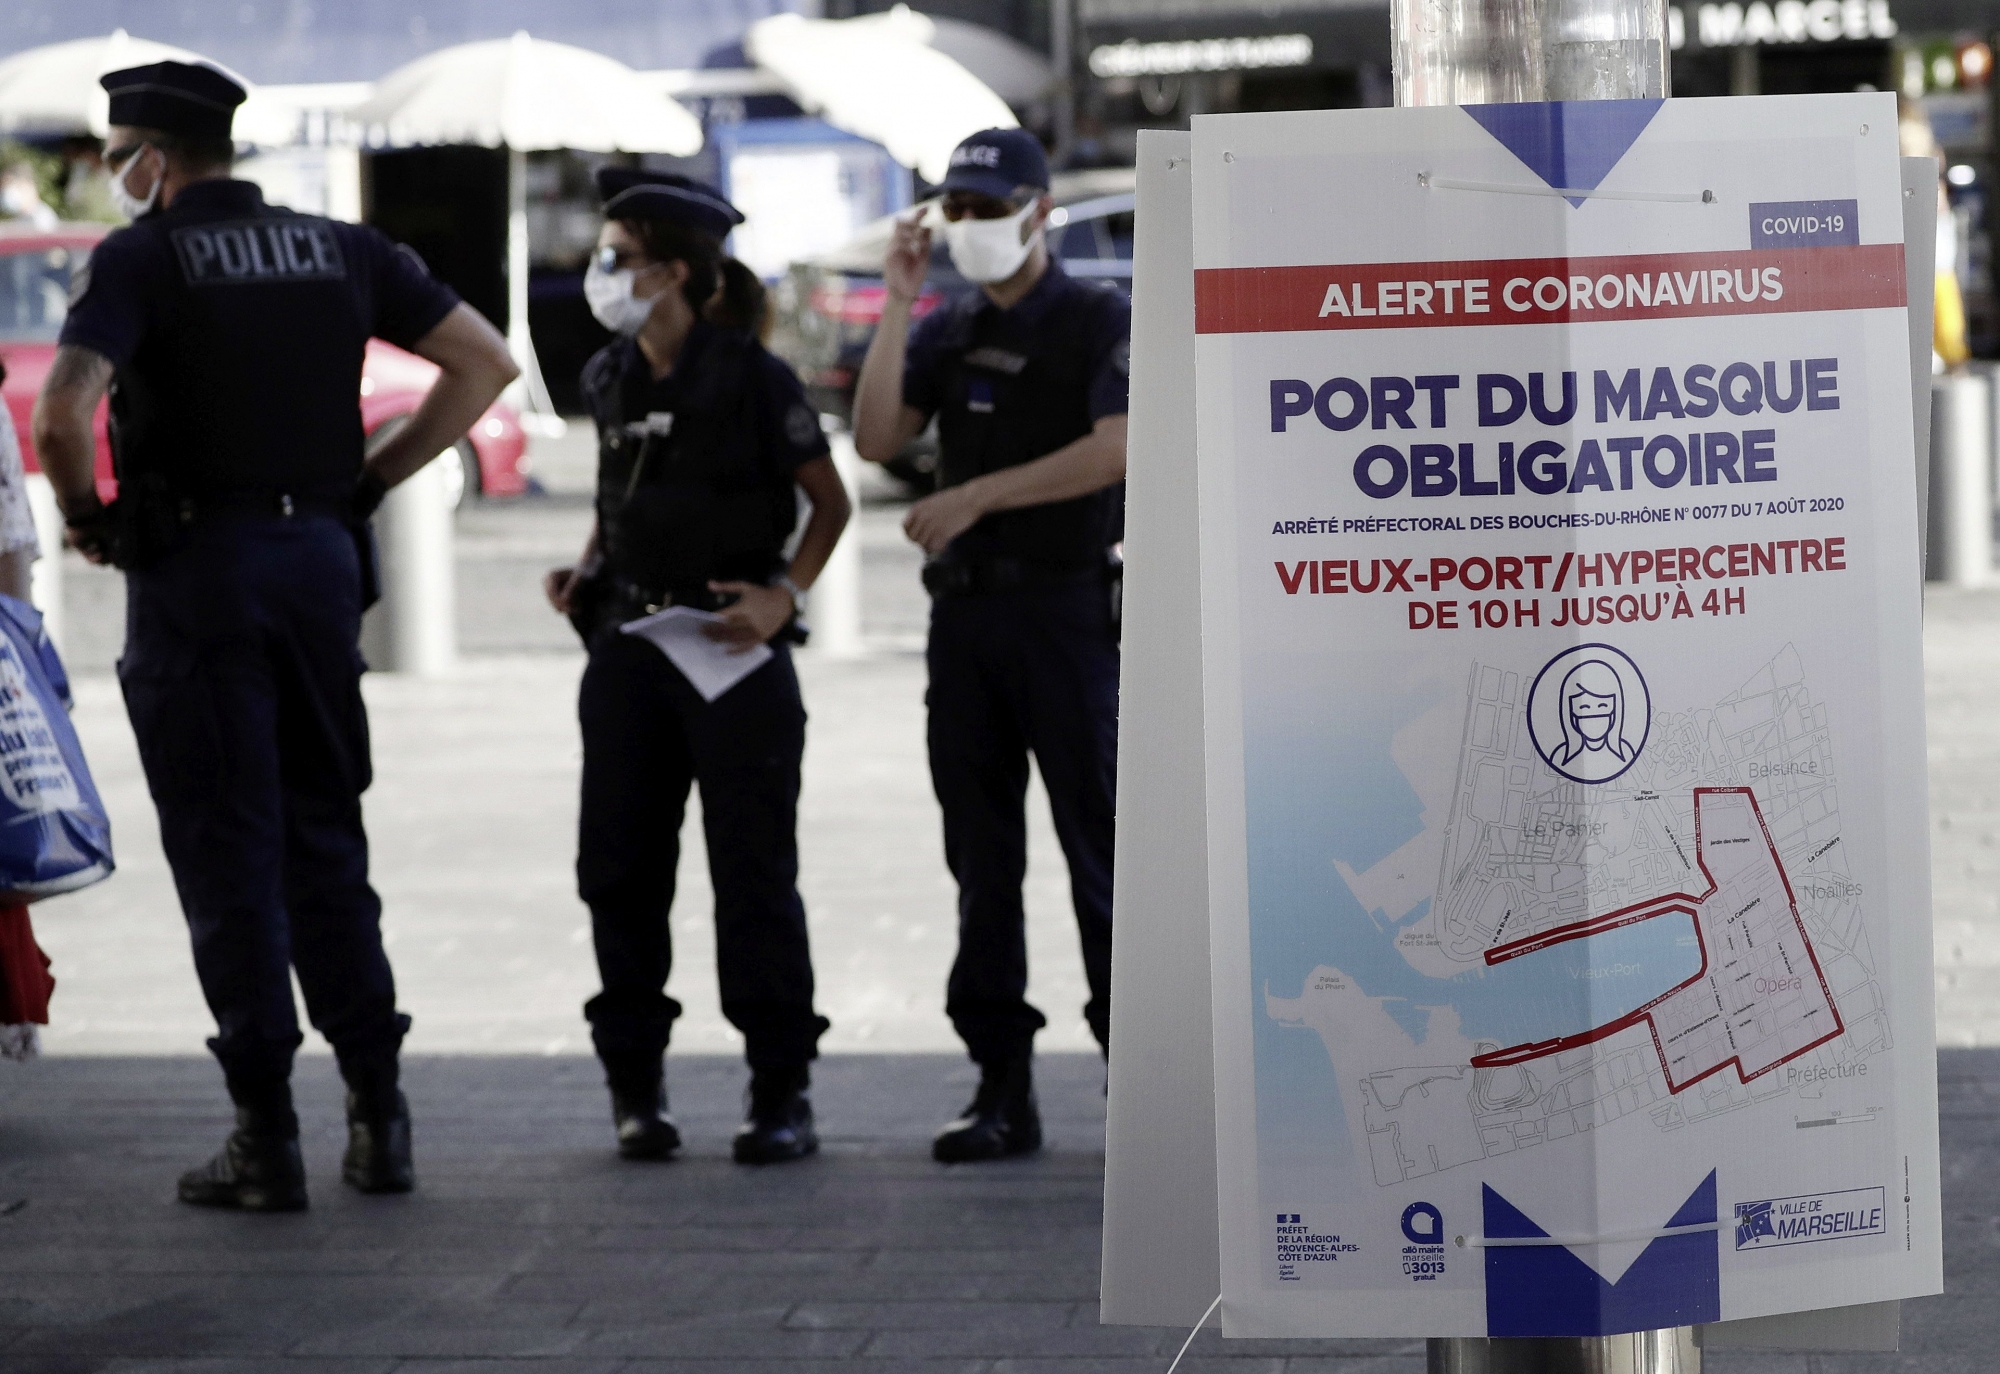 epa08609635 French policemen wearing protective face masks control people at a test station for  Covid-19 coronavirus in Marseille, France, 17 August 2020. Marseille has been declared a zone of 'active circulation' for the Covid19 coronavirus, as cases surged in recent weeks. The banner reads 'wearing a mask is an obligation at old harbour and citycenter'.  EPA/GUILLAUME HORCAJUELO